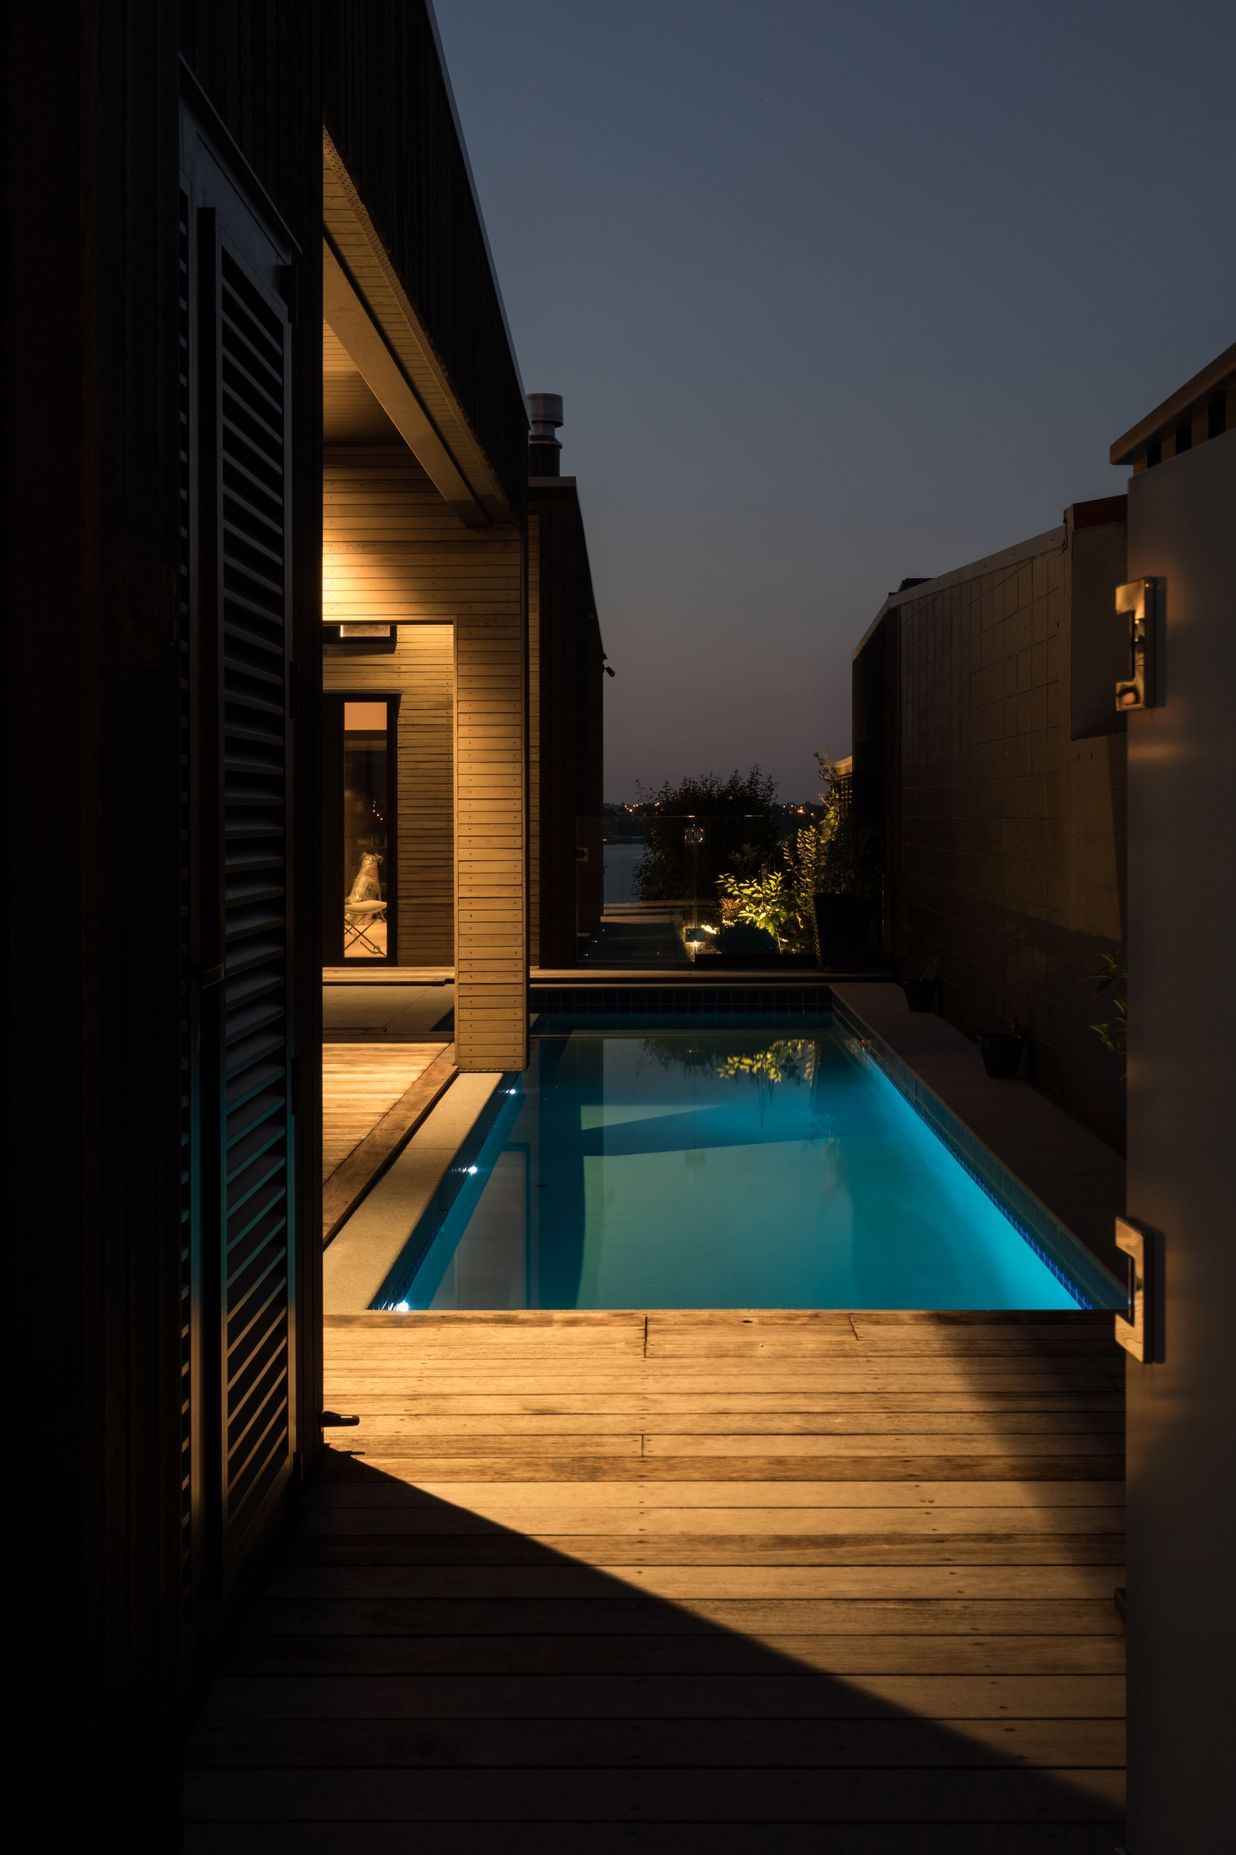  The lap pool sits alongside the house and enjoys glimpses of the harbour beyond.